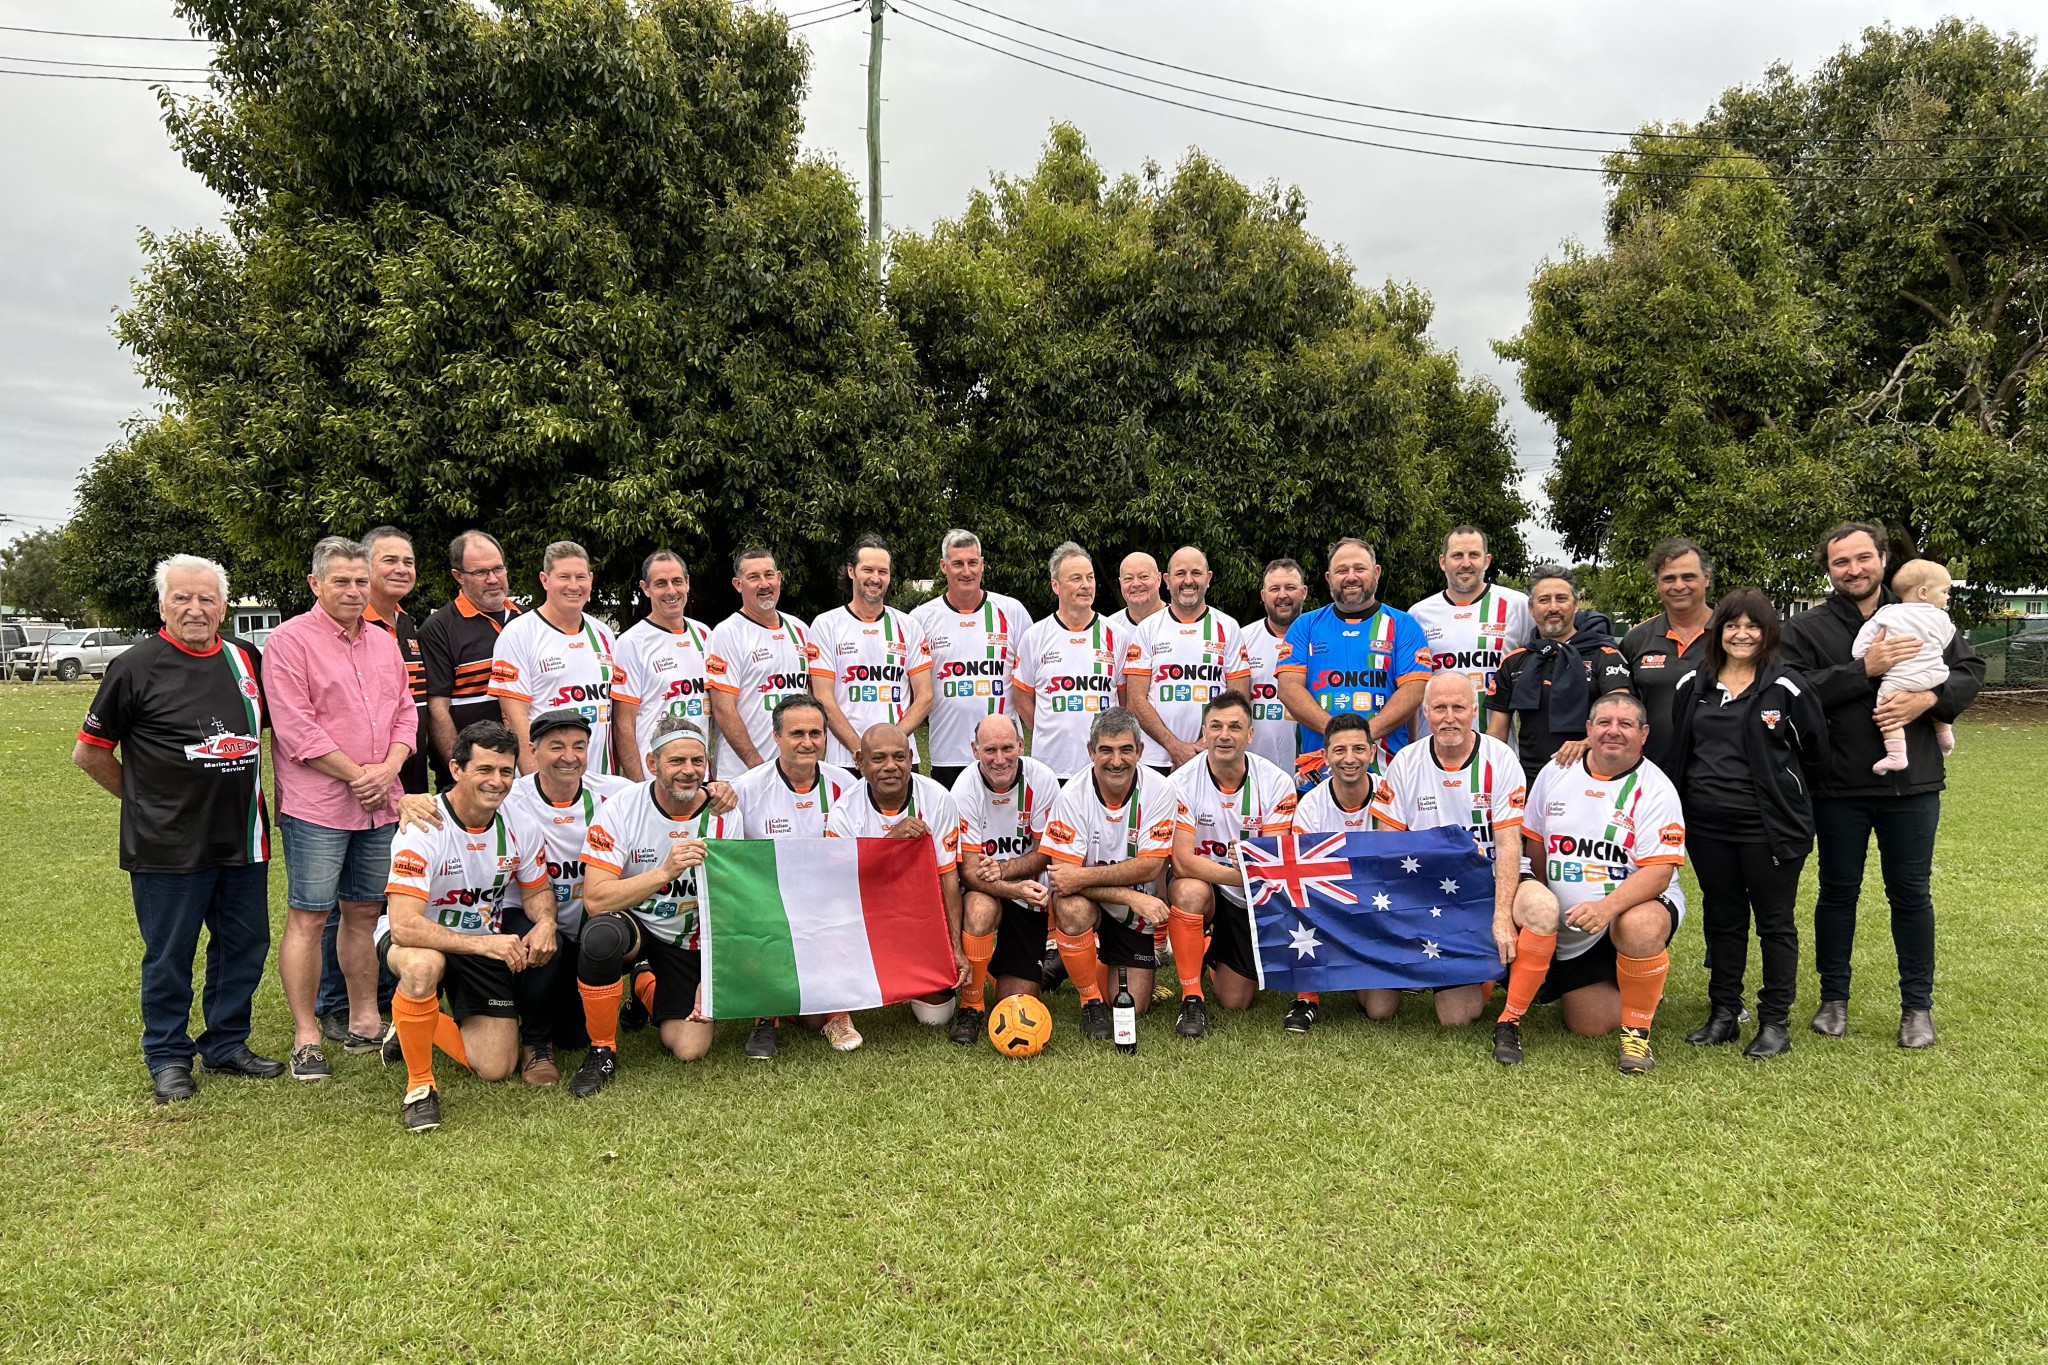 Mareeba’s over 45s team with John Bomben (left) and members of the Moriconi family (right).